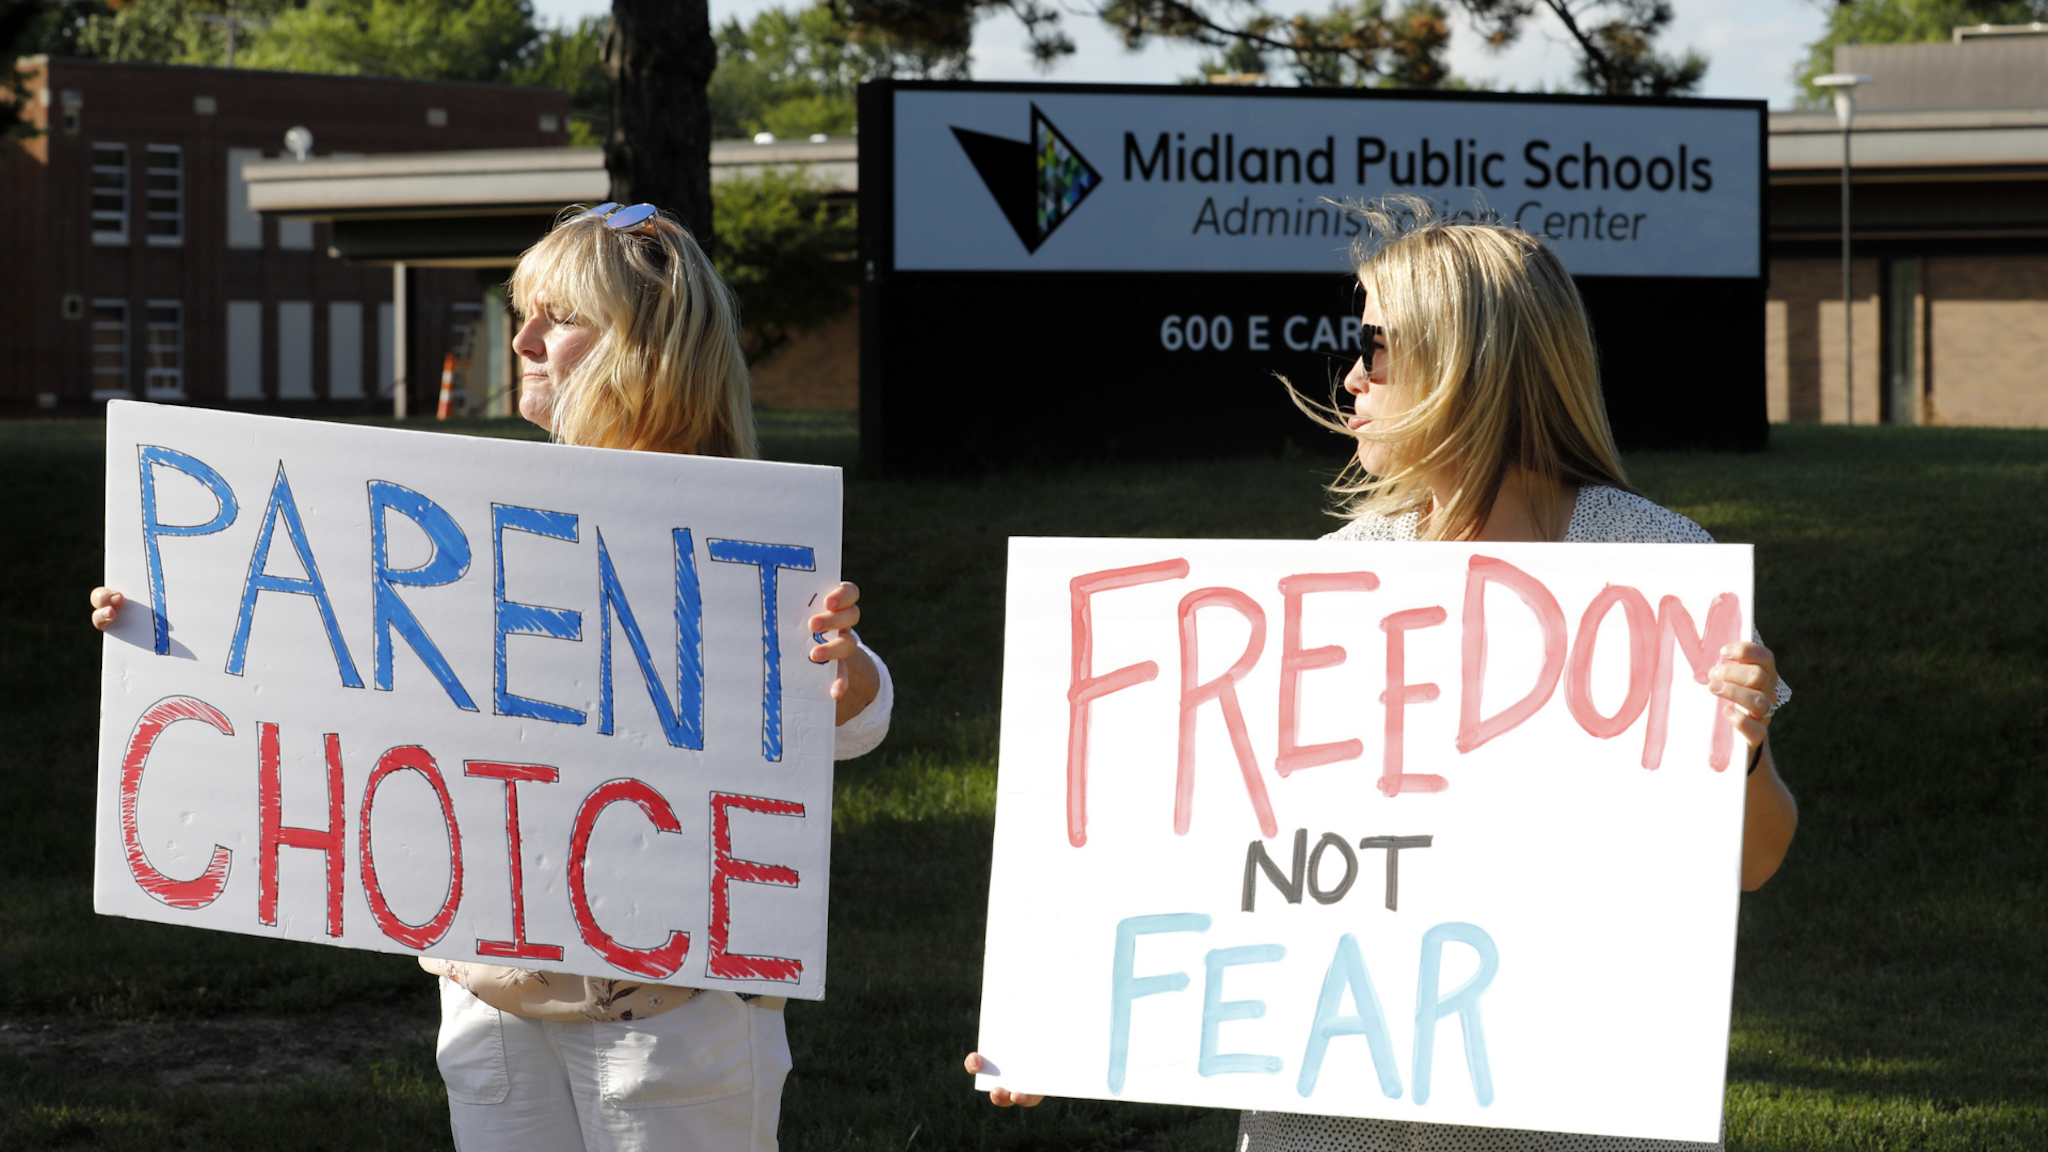 Demonstrators hold signs during a rally against the Midland Public Schools (MPS) mask mandates outside the MPS administration building in Midland, Michigan, U.S., on Wednesday, Sept. 1, 2021.